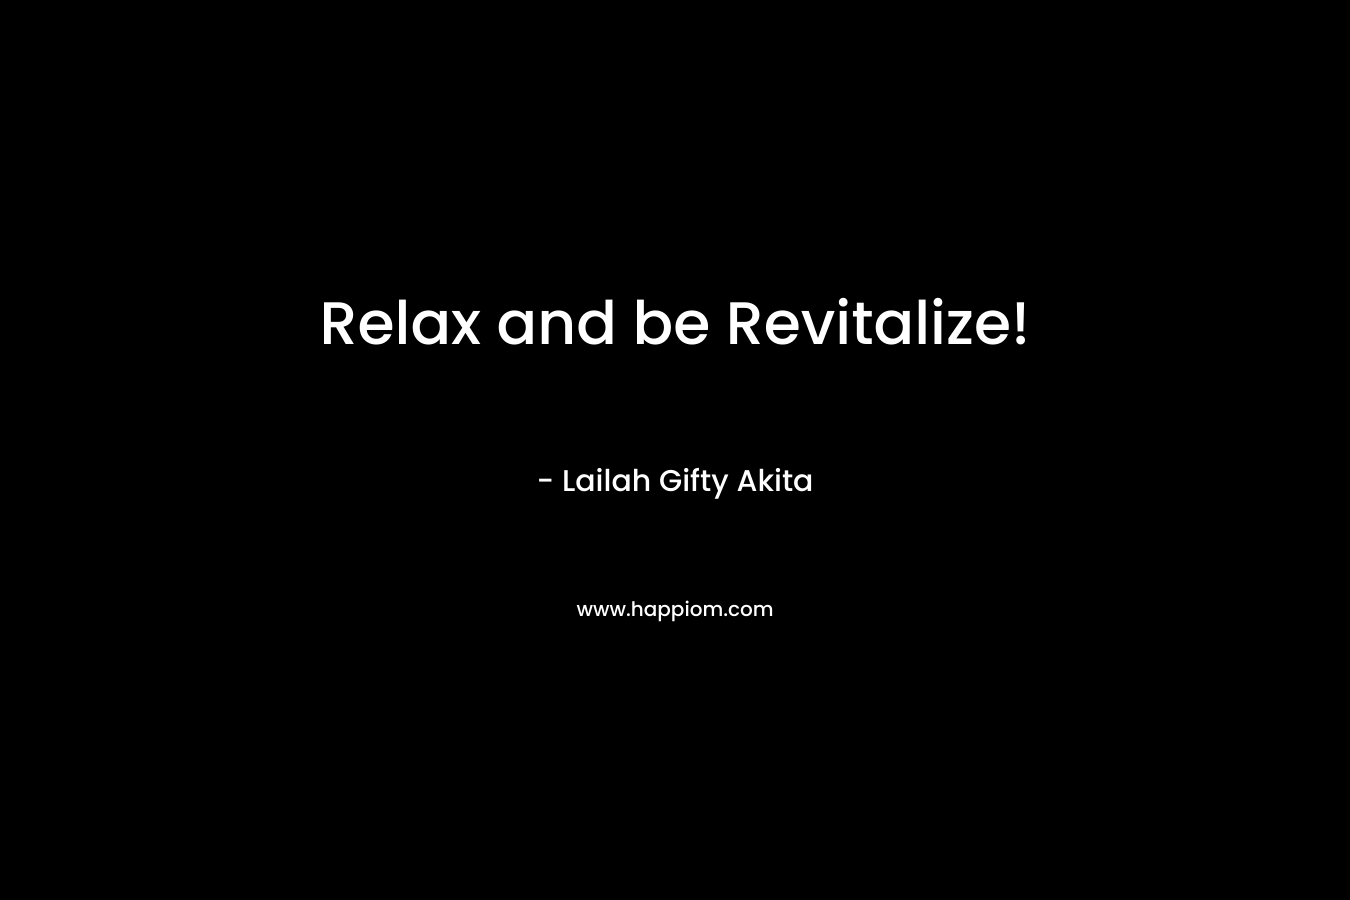 Relax and be Revitalize!